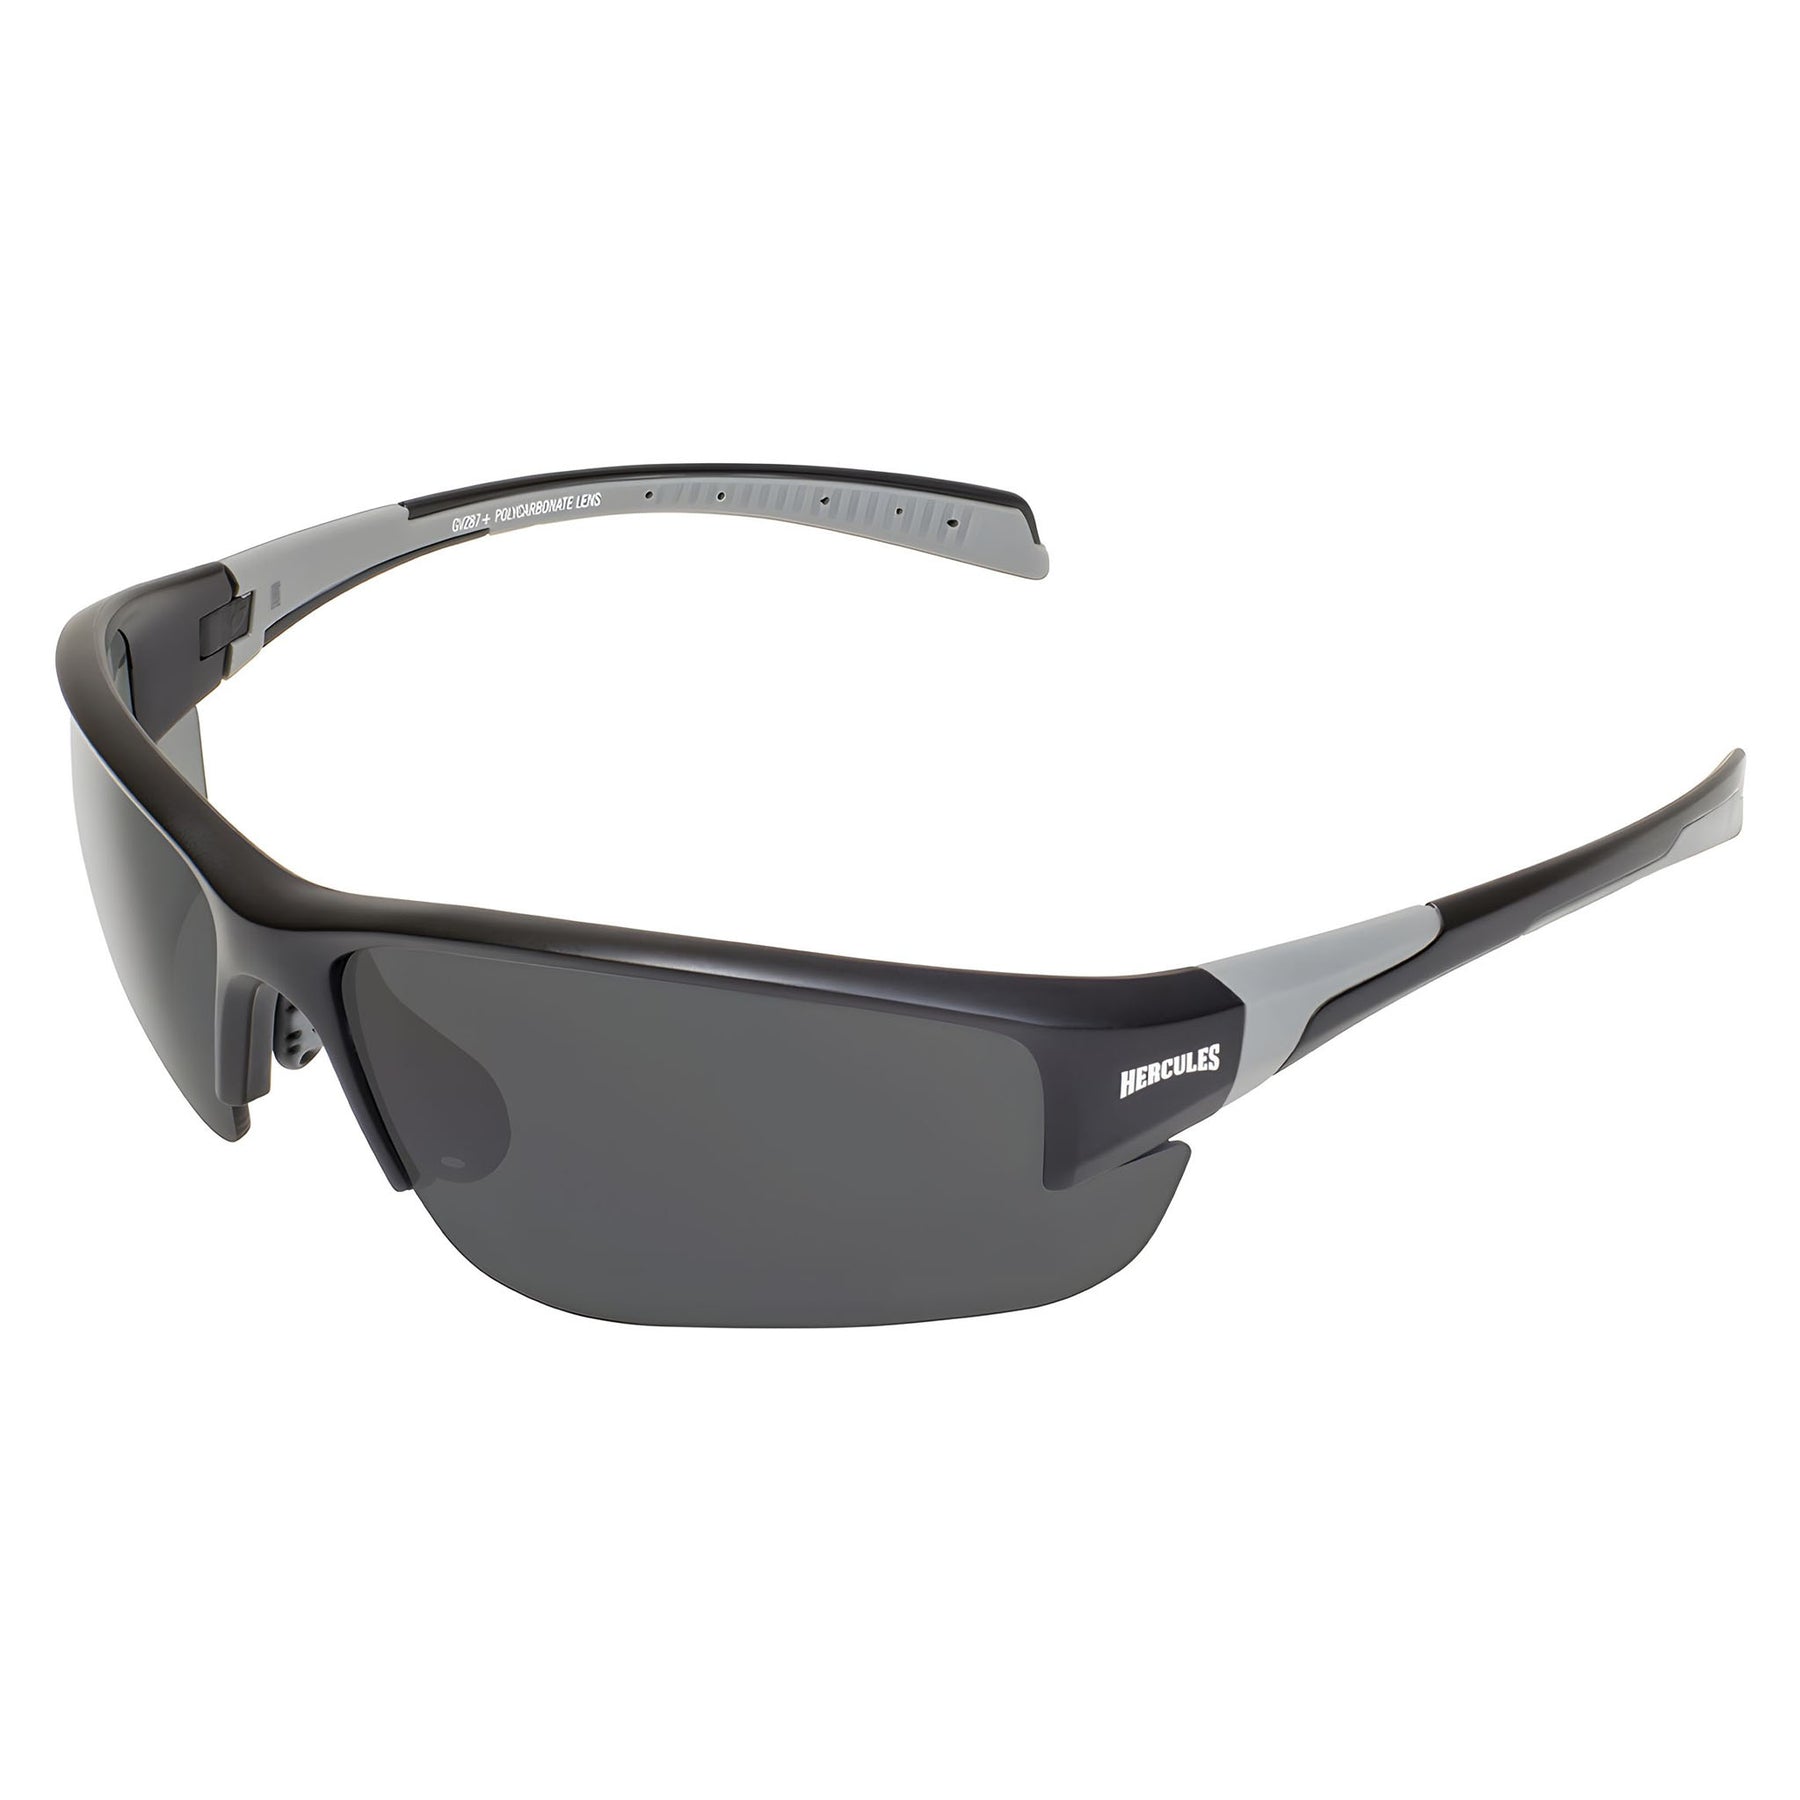 Hercules 7 Safety Glasses